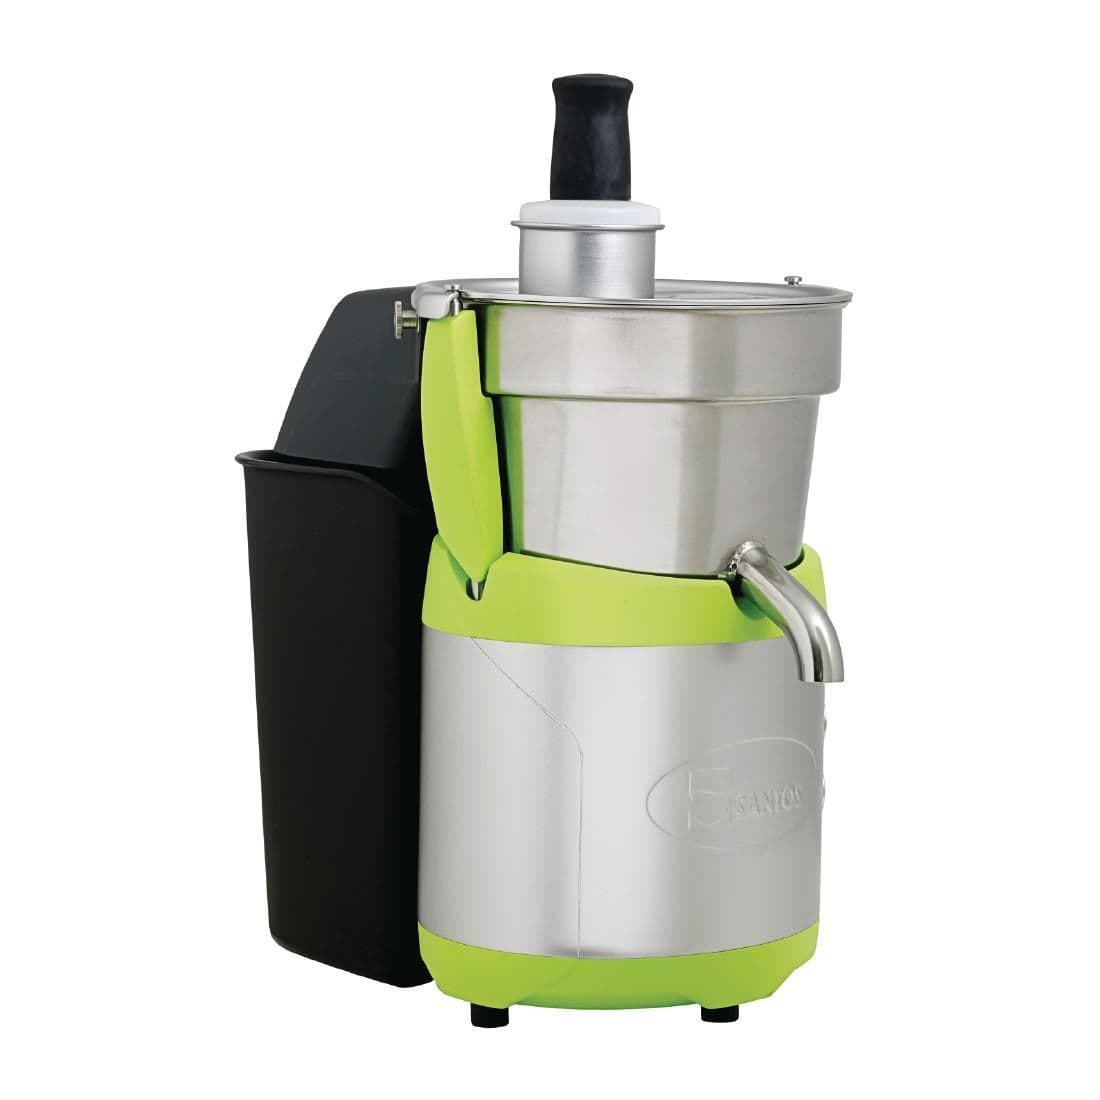 GH739 Santos Centrifugal Juicer Miracle Edition JD Catering Equipment Solutions Ltd